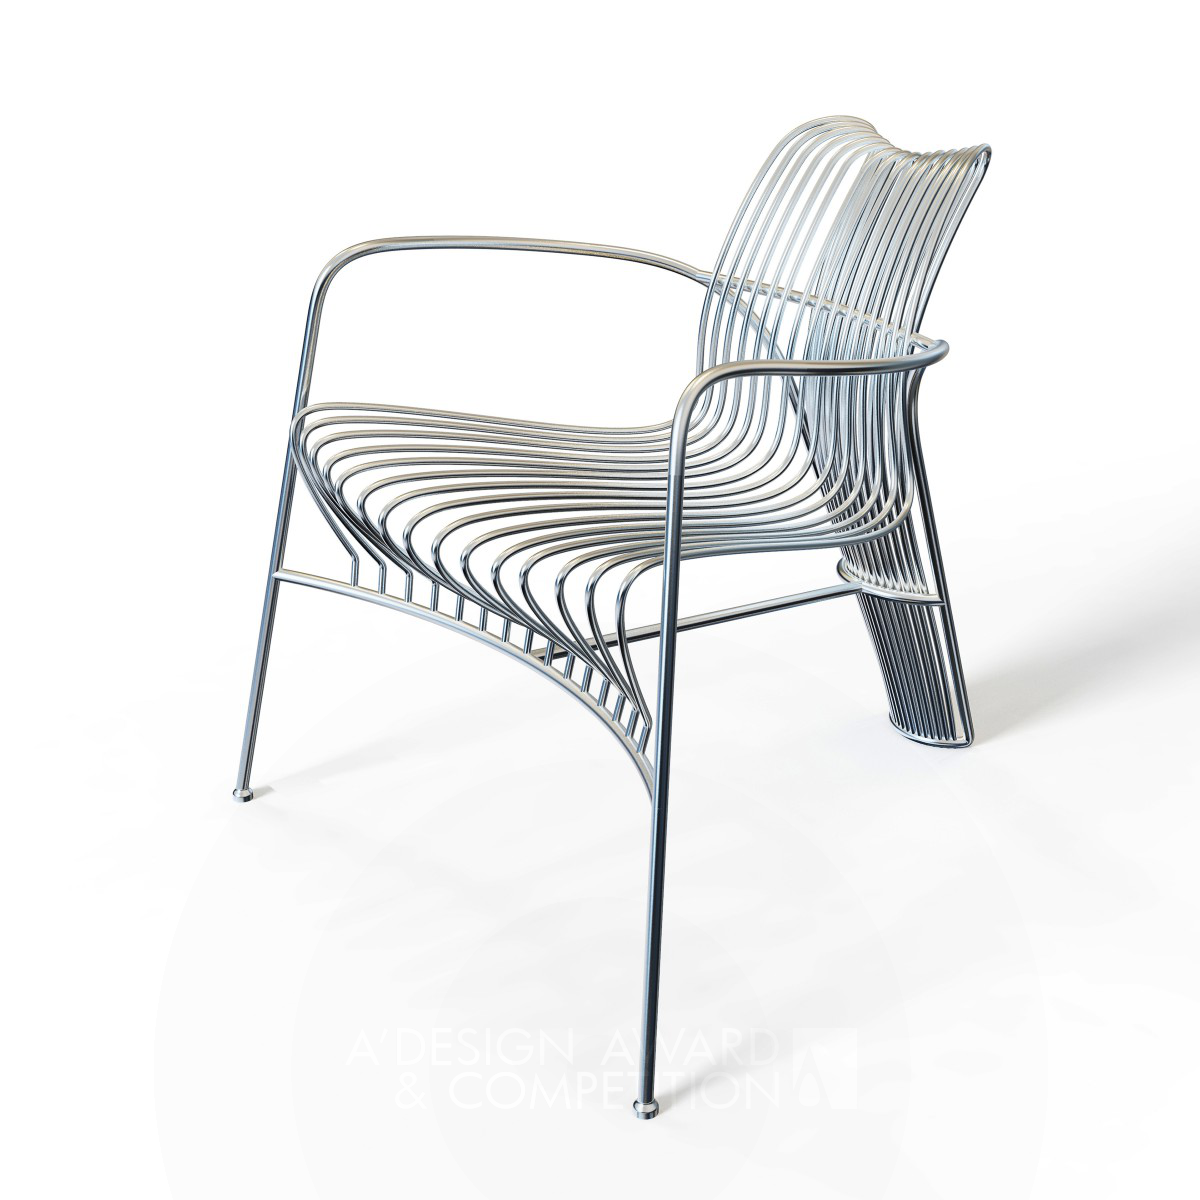 Wei Jingye wins Bronze at the prestigious A' Furniture Design Award with Strings Leisure Chair.